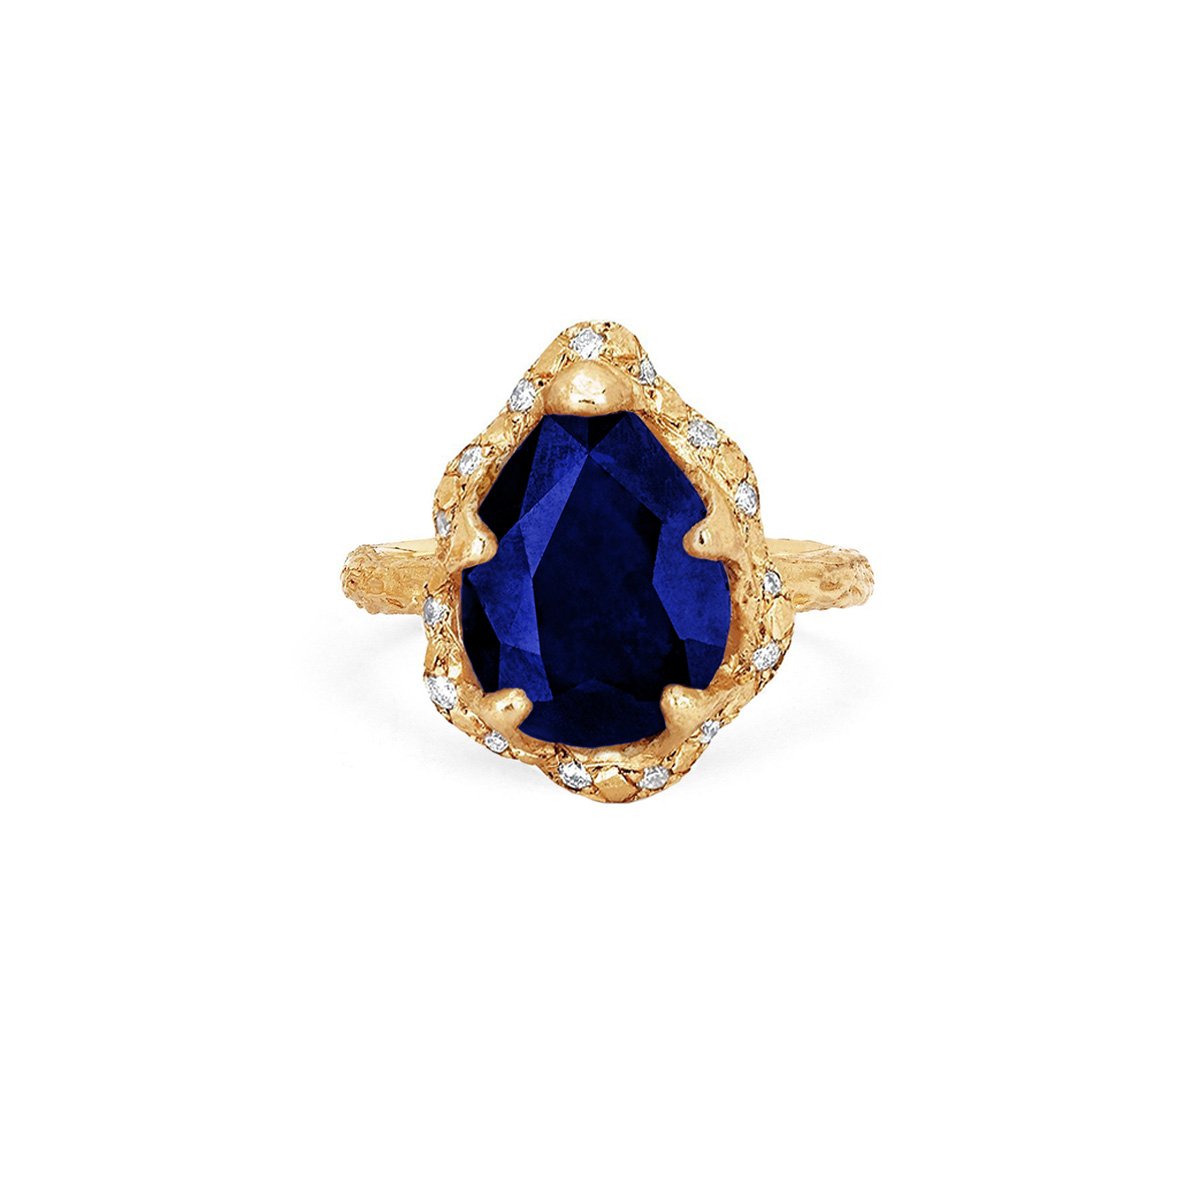 NEW! 18k Premium Baby Queen Water Drop Sapphire Ring with Sprinkled Diamond Halo